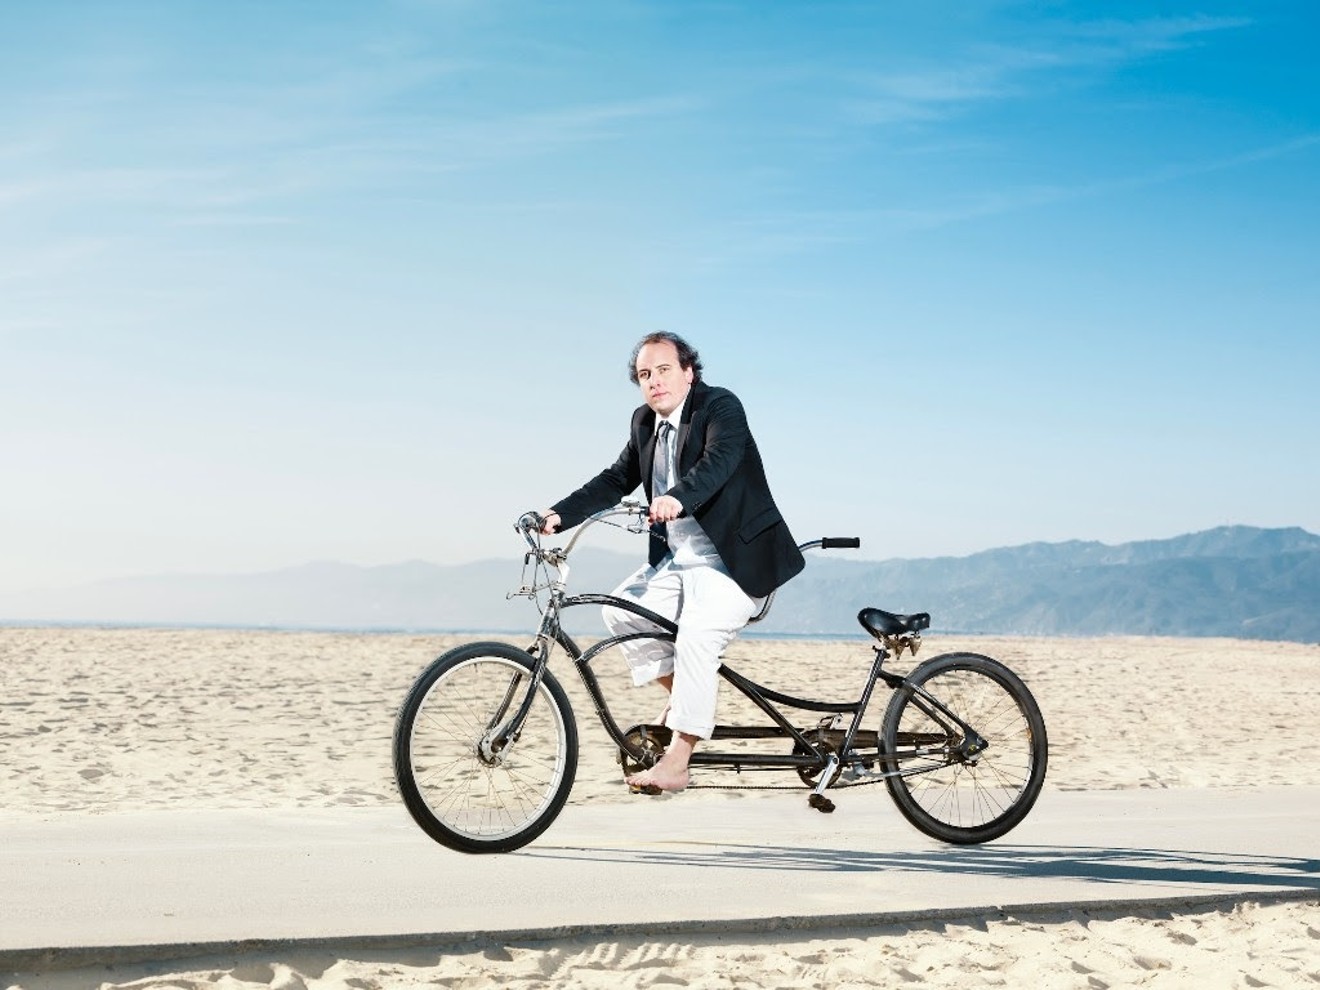 Har Mar Superstar is cruising after his latest releases, Best Summer Ever and the Personal Boy EP, drew widespread acclaim.